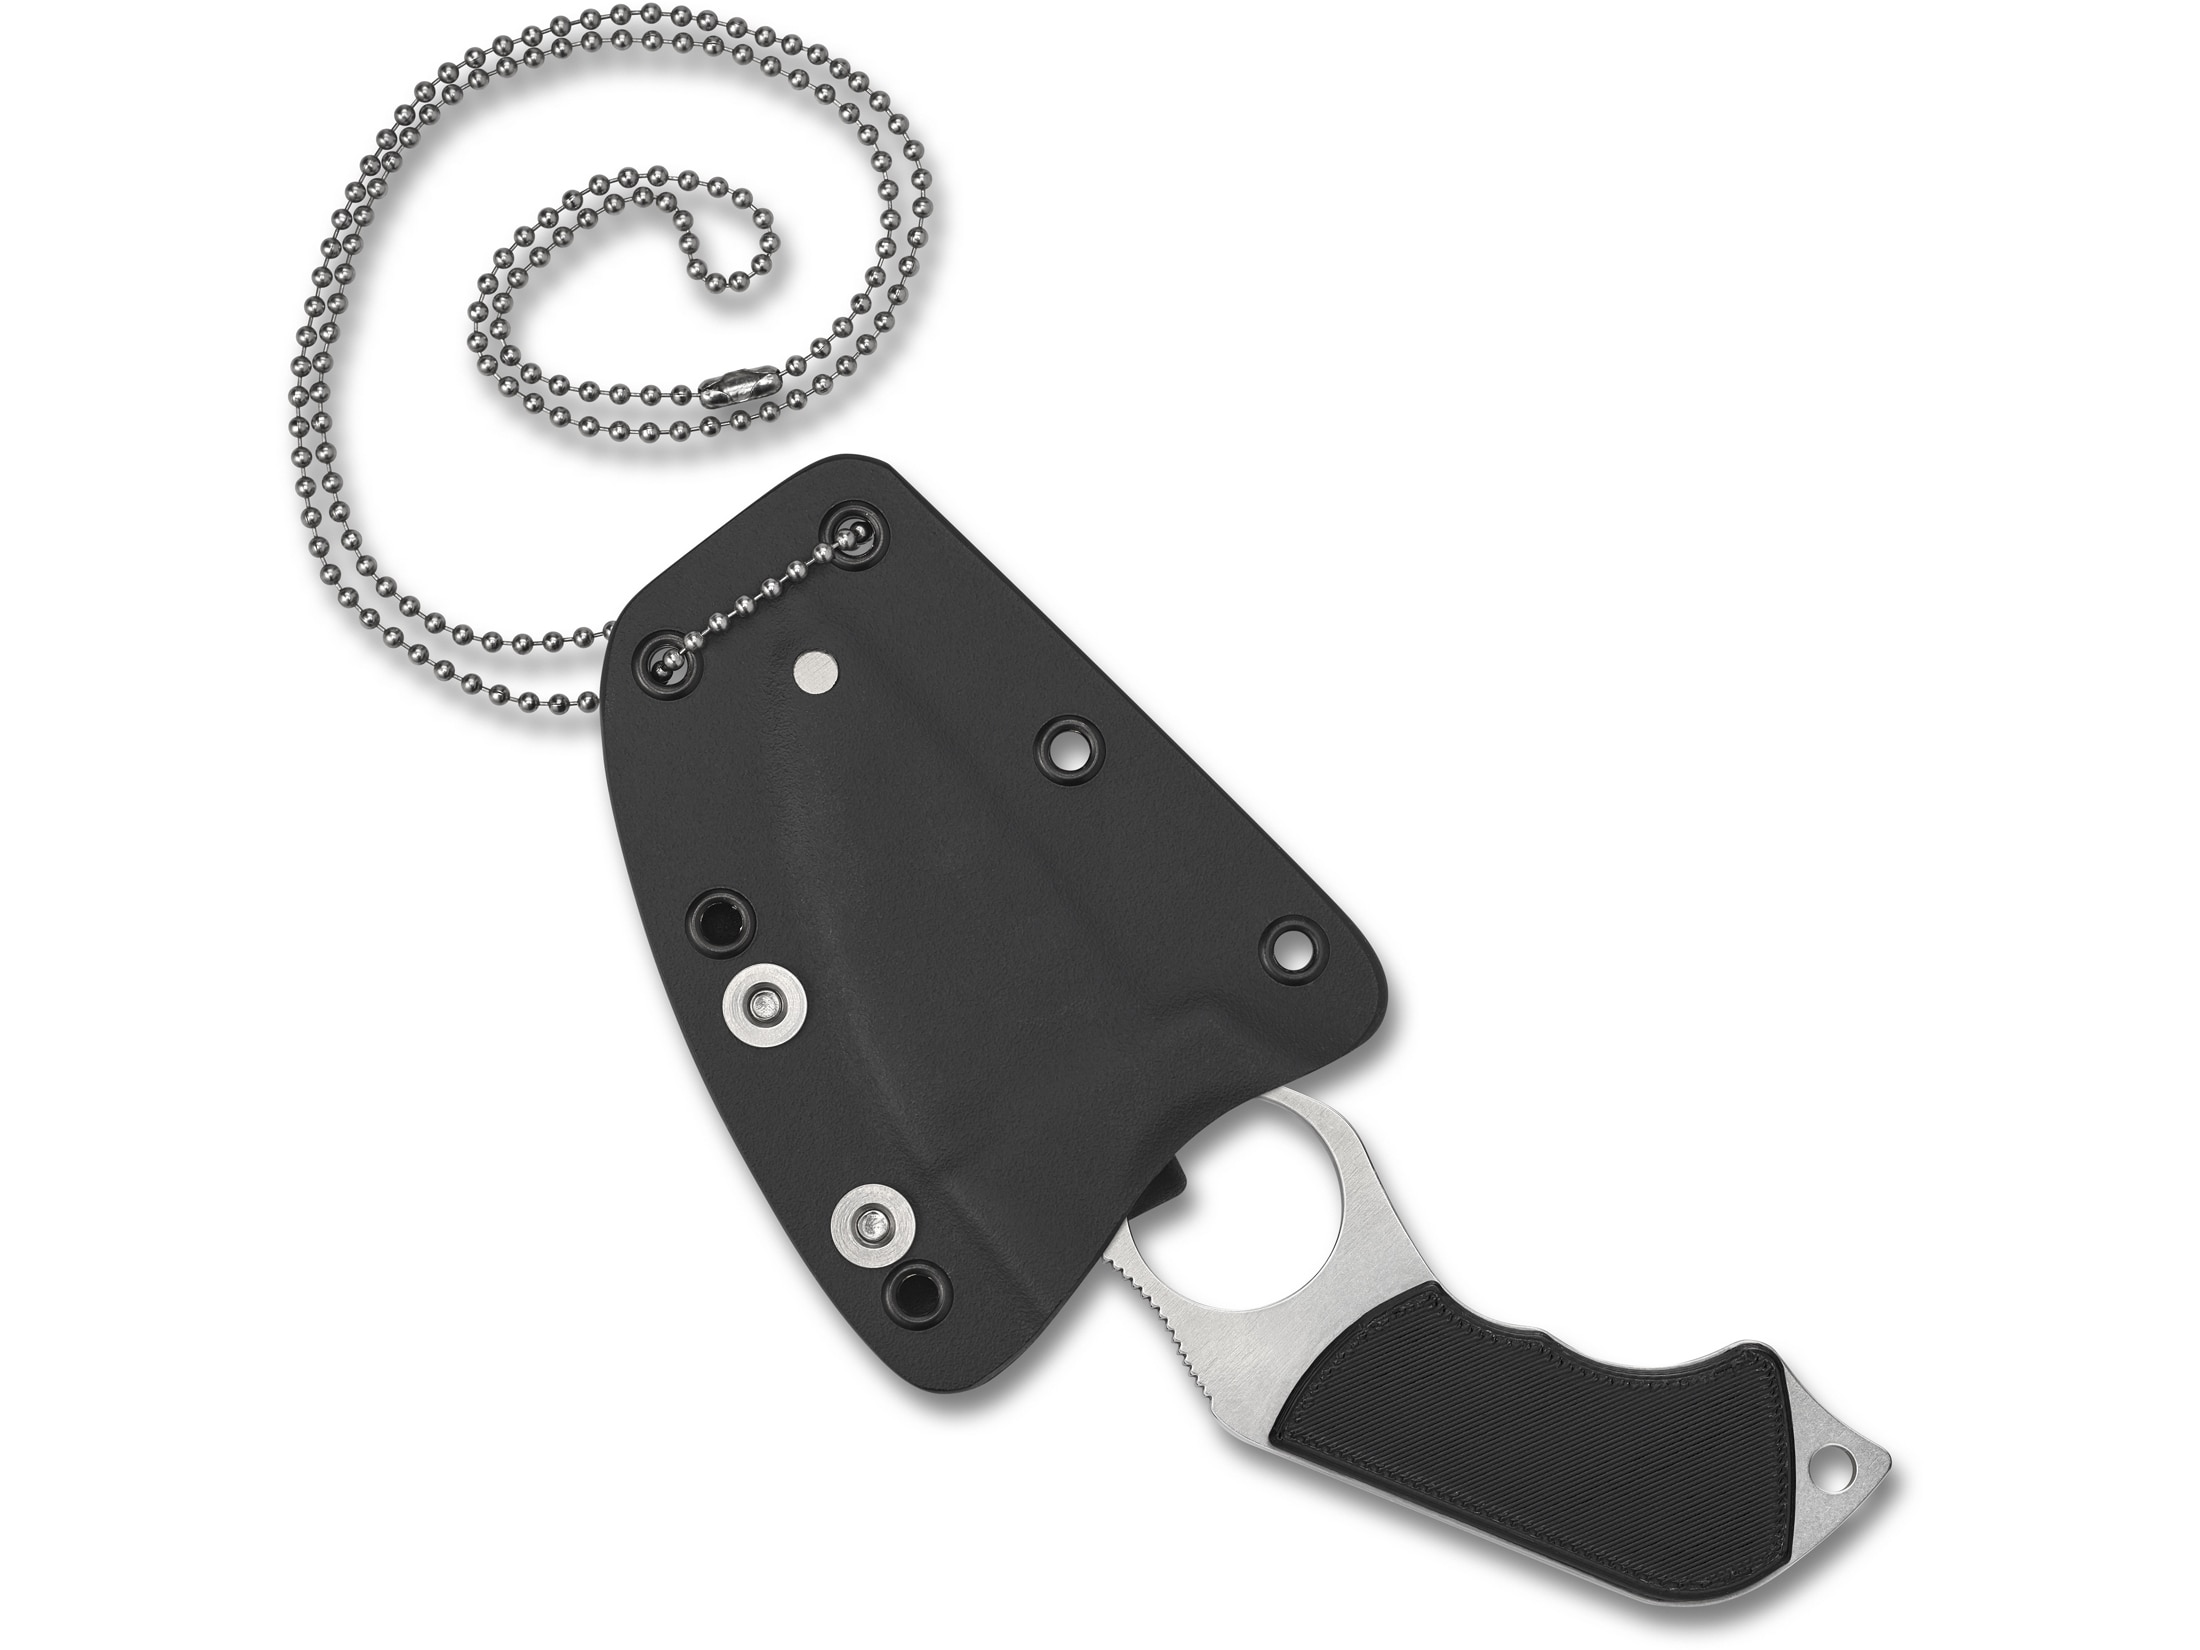 Spyderco Swick 6 Small Black G-10 Fixed Blade Knife For Sale